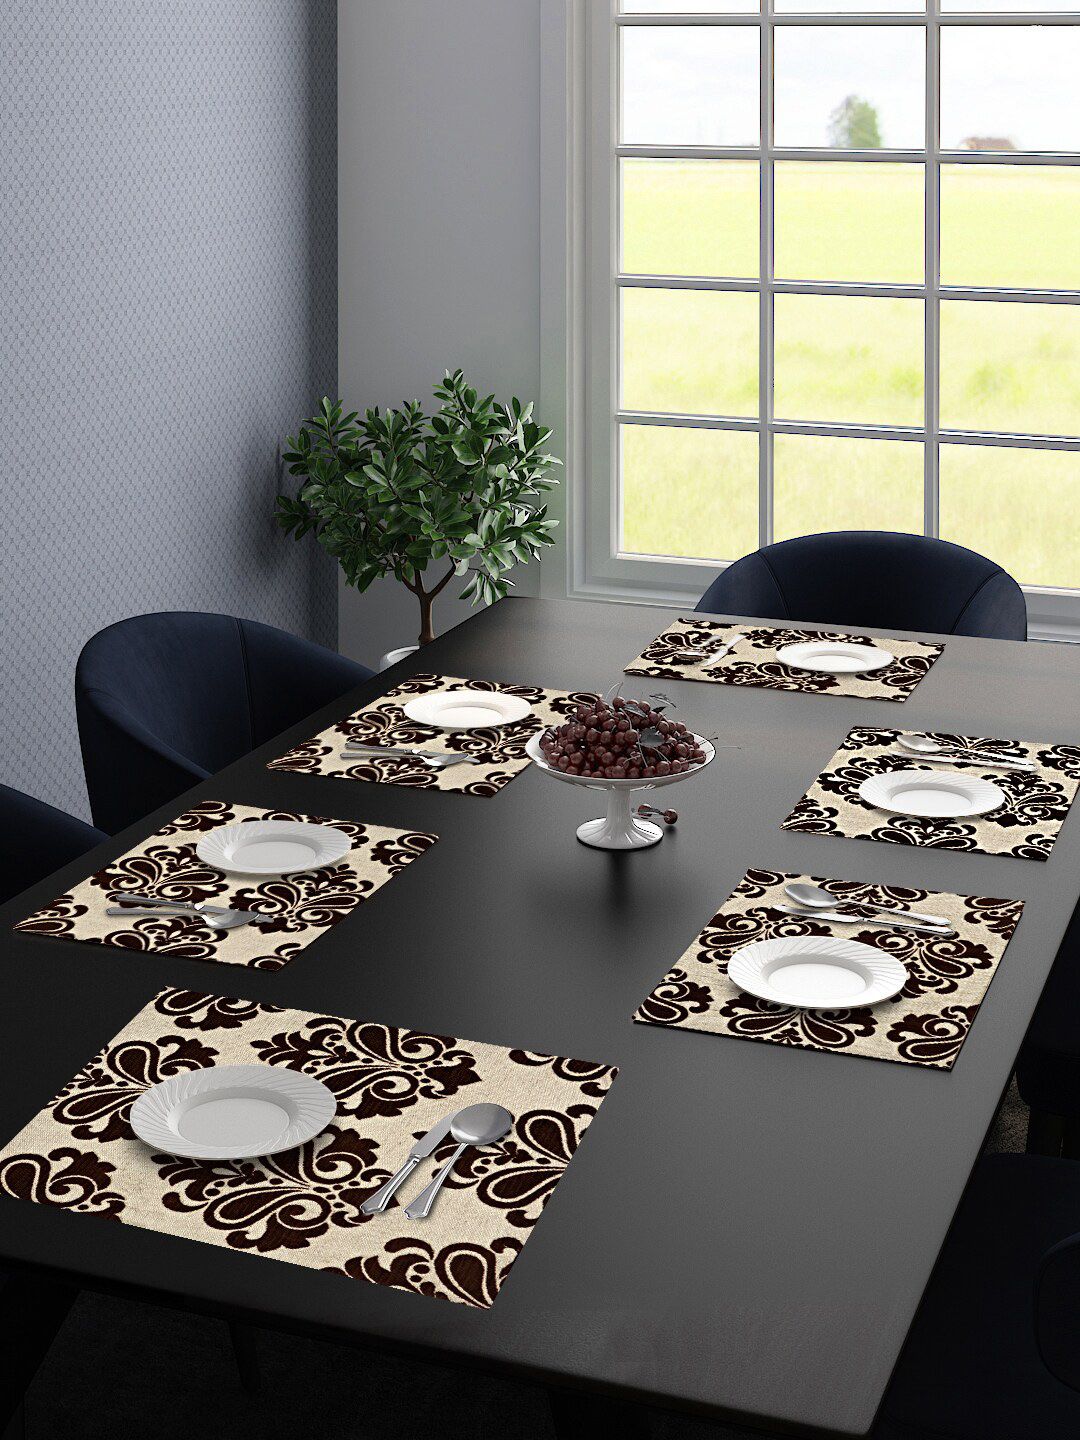 Saral Home Set Of 6 Cream & Brown Printed Table Placemats 34X45 CM Price in India